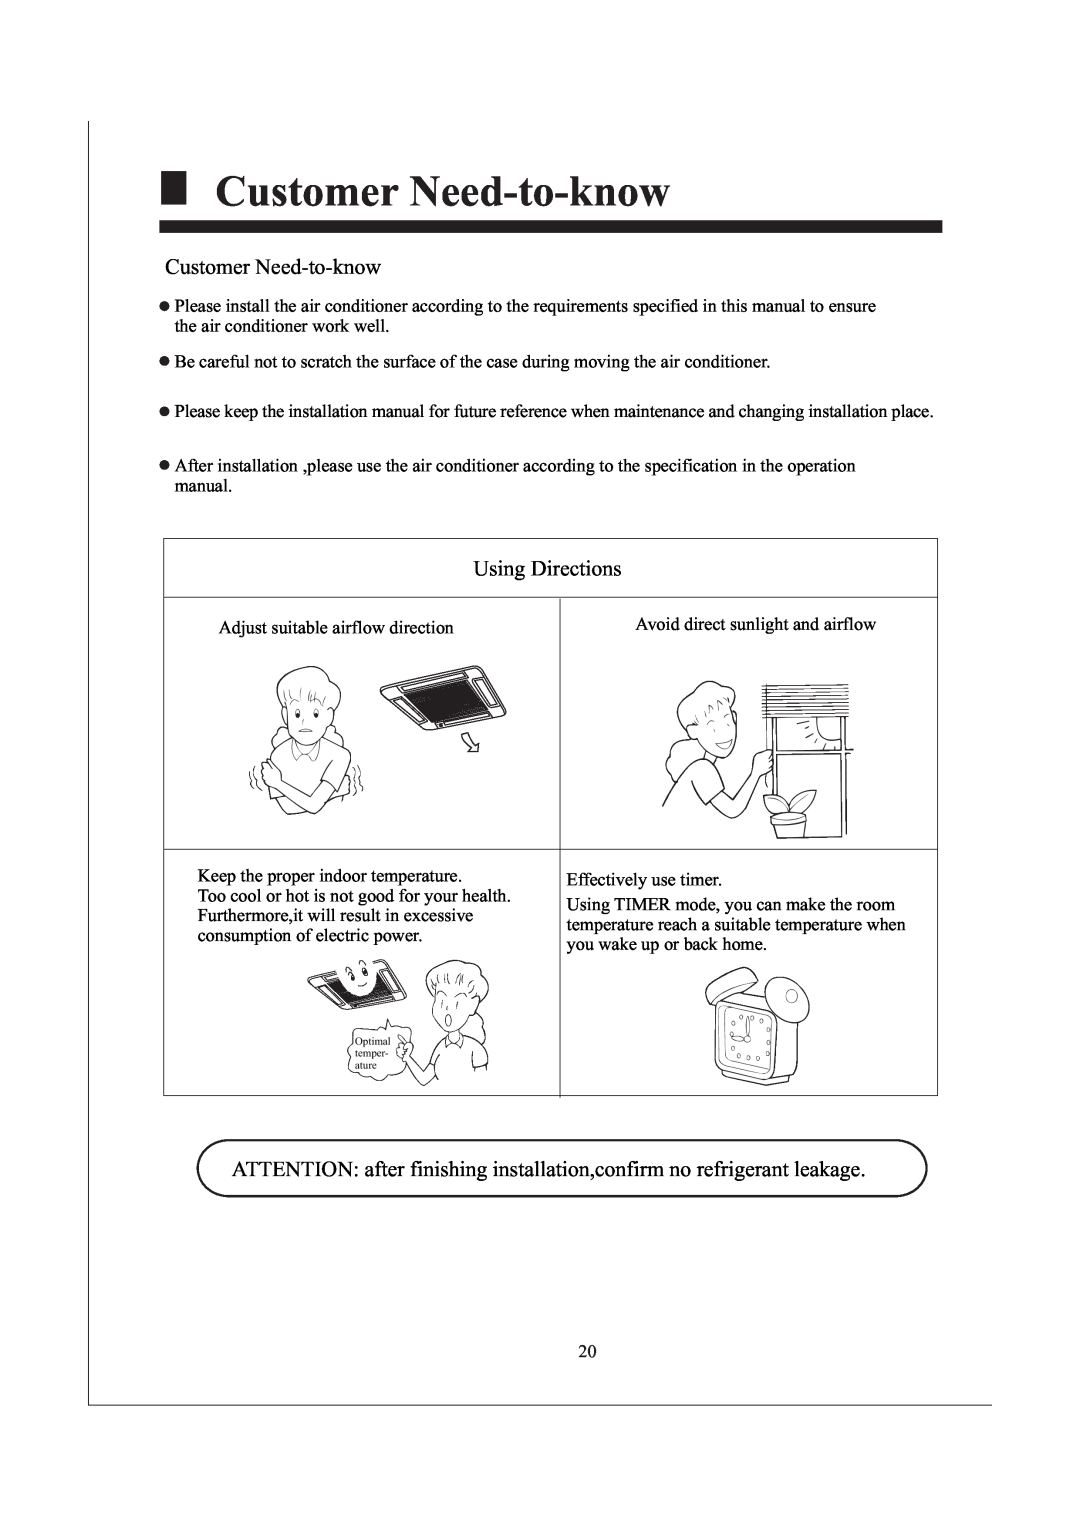 Haier AB242XCAAA operation manual Customer Need-to-know, Using Directions 